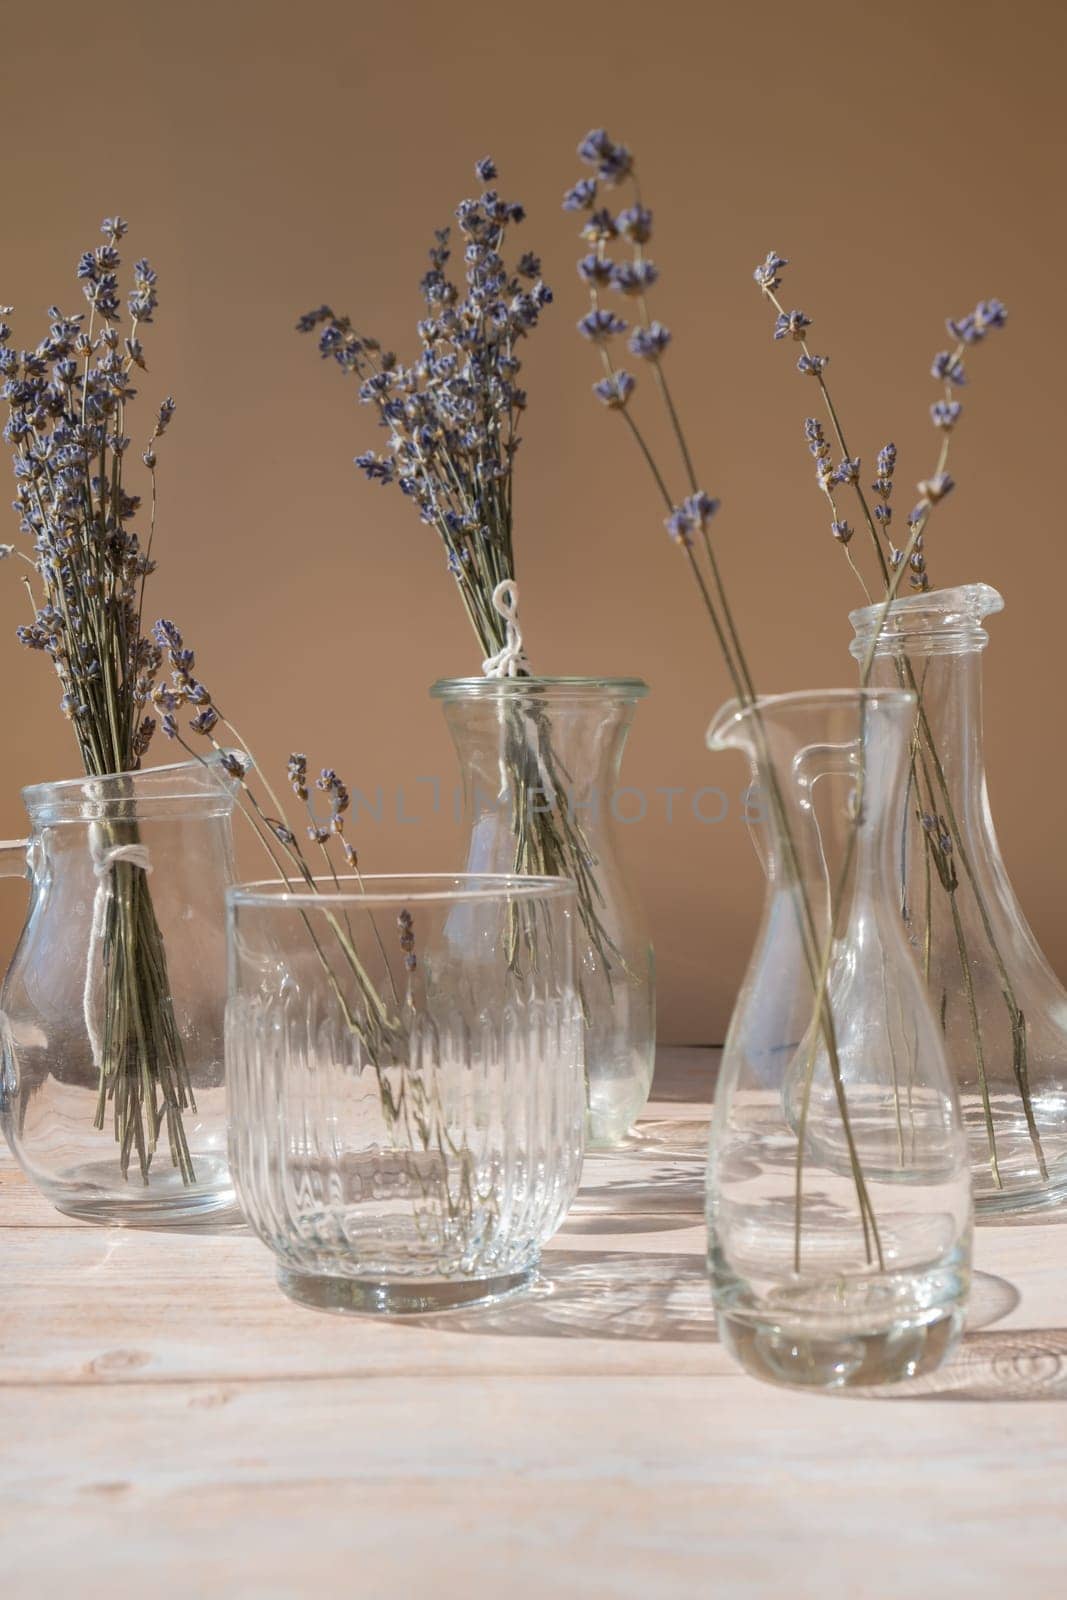 Lavender flowers in glass dishes. Dried herbal flowers on beige background. Minimal still life eco concept. Ideal space for displaying cosmetics with lavender extract by anna_stasiia